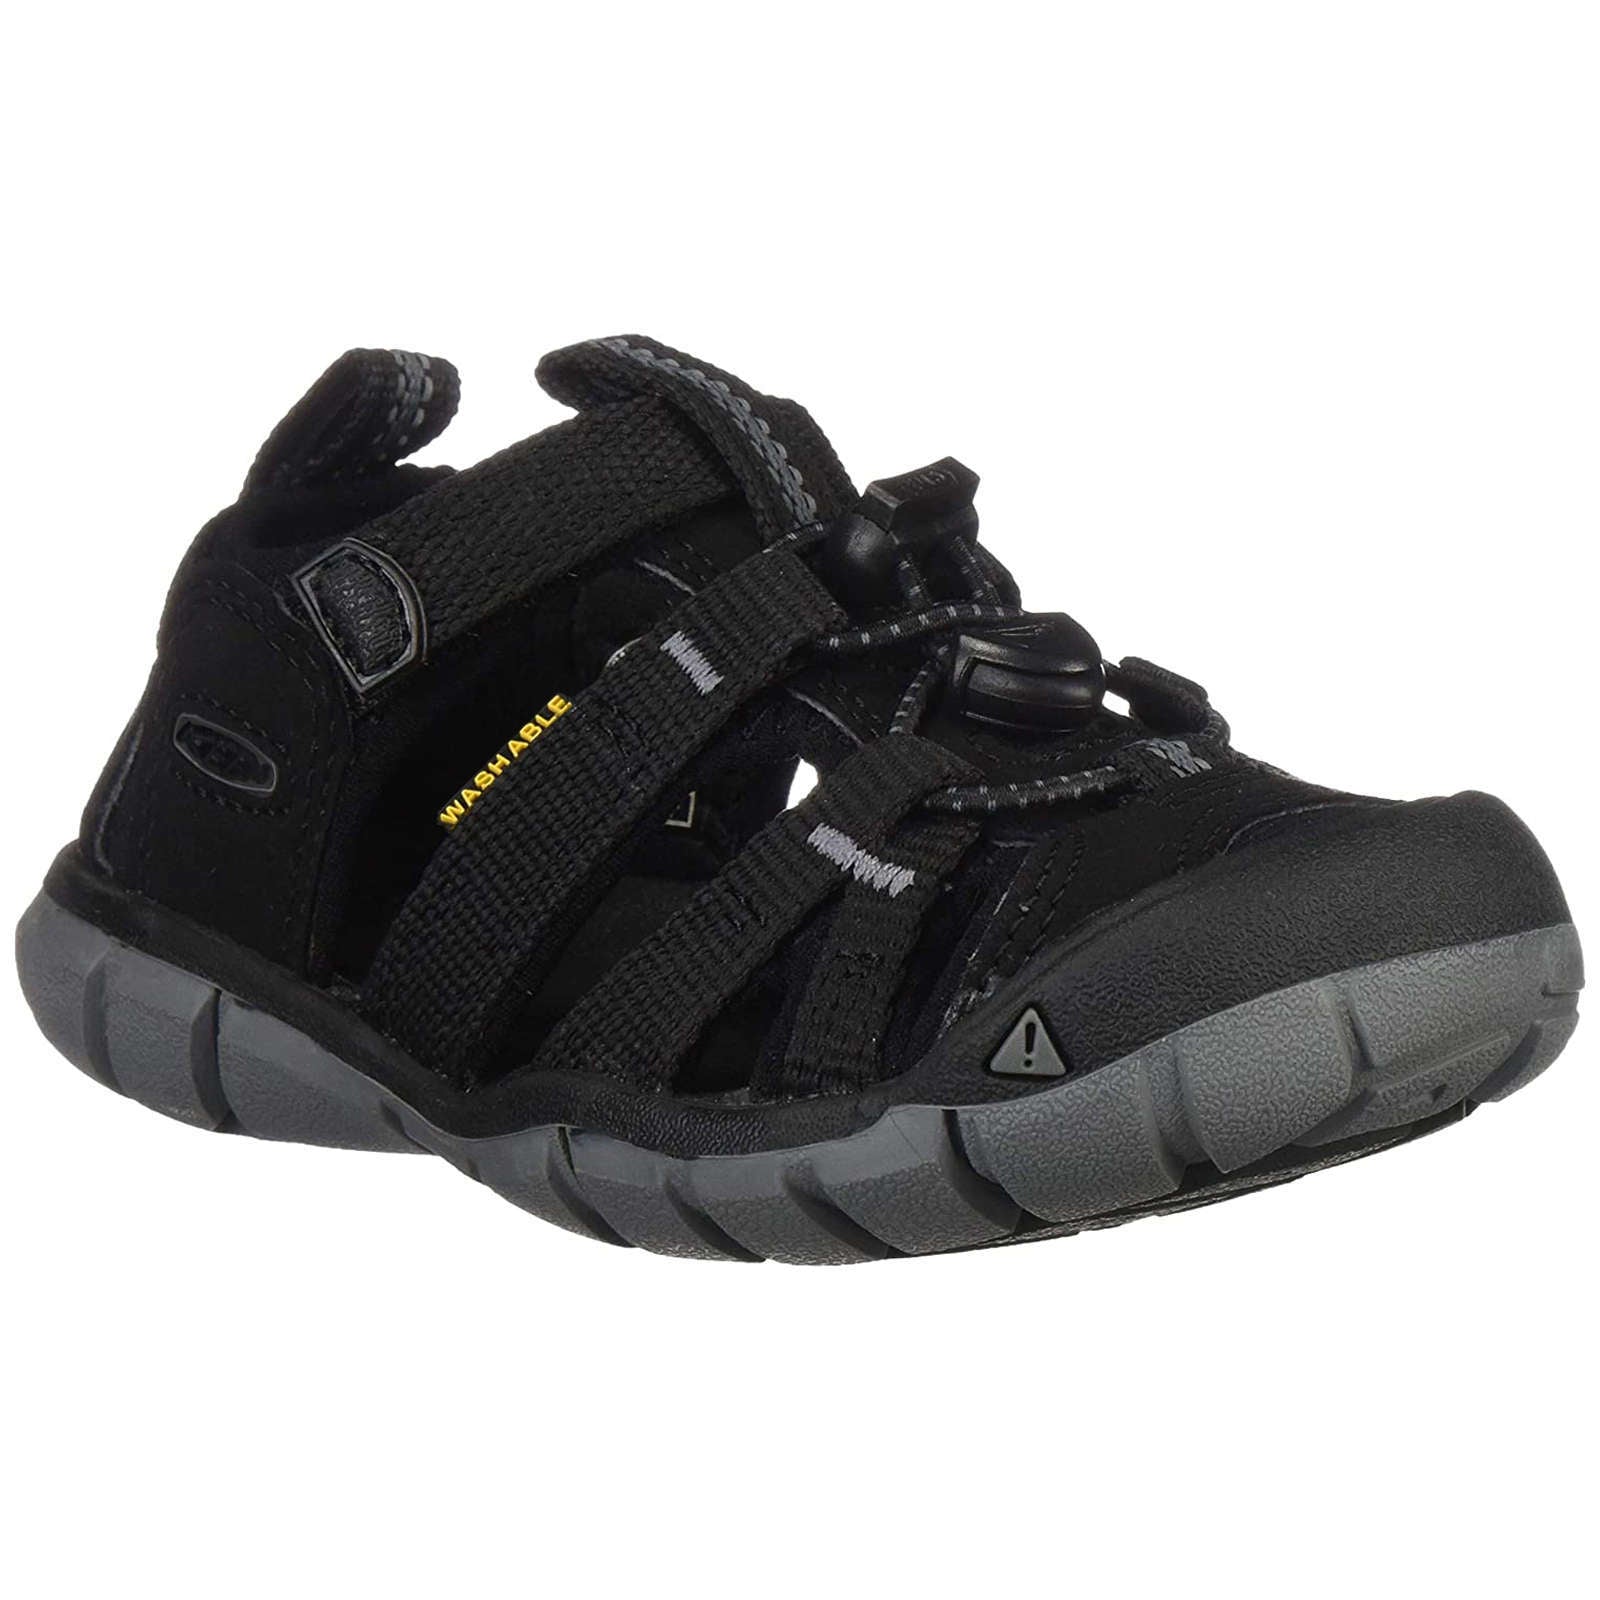 Keen Seacamp II CNX Textile Synthetic Youth Sandals#color_black steel grey